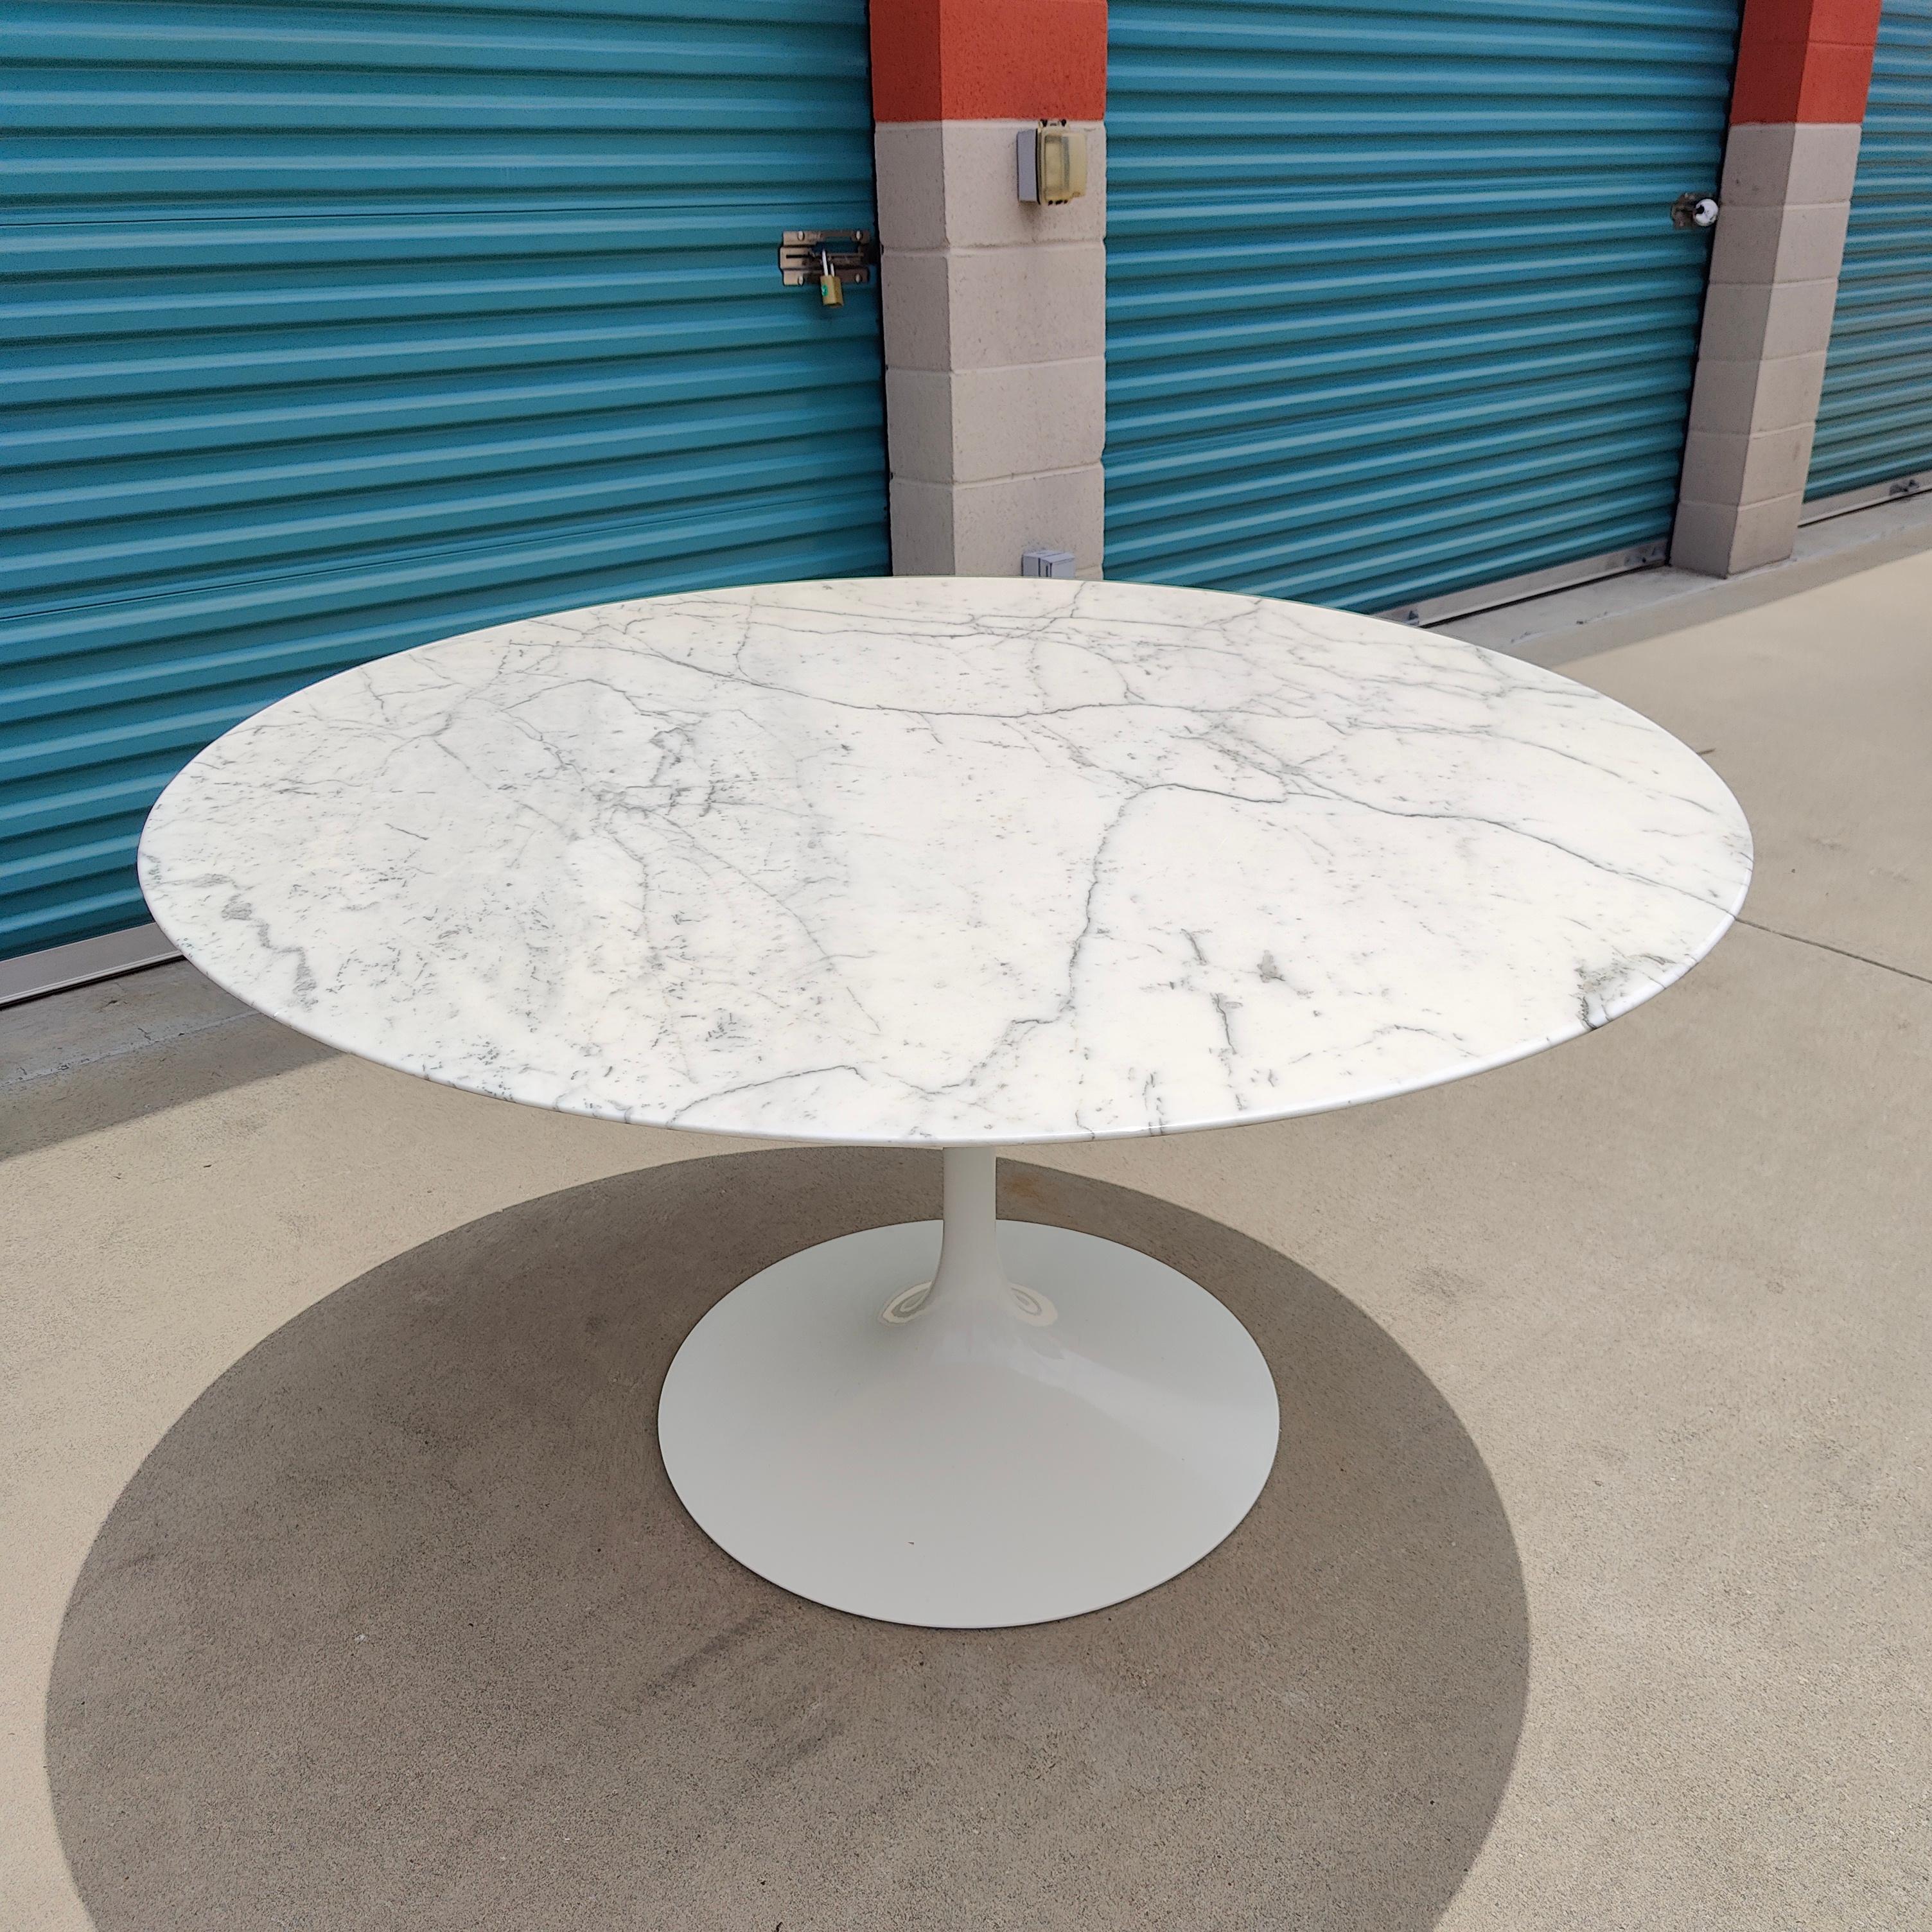 Contemporary Marble Tulip Table by Eero Saarinen for Knoll, 50th Anniversary Edition